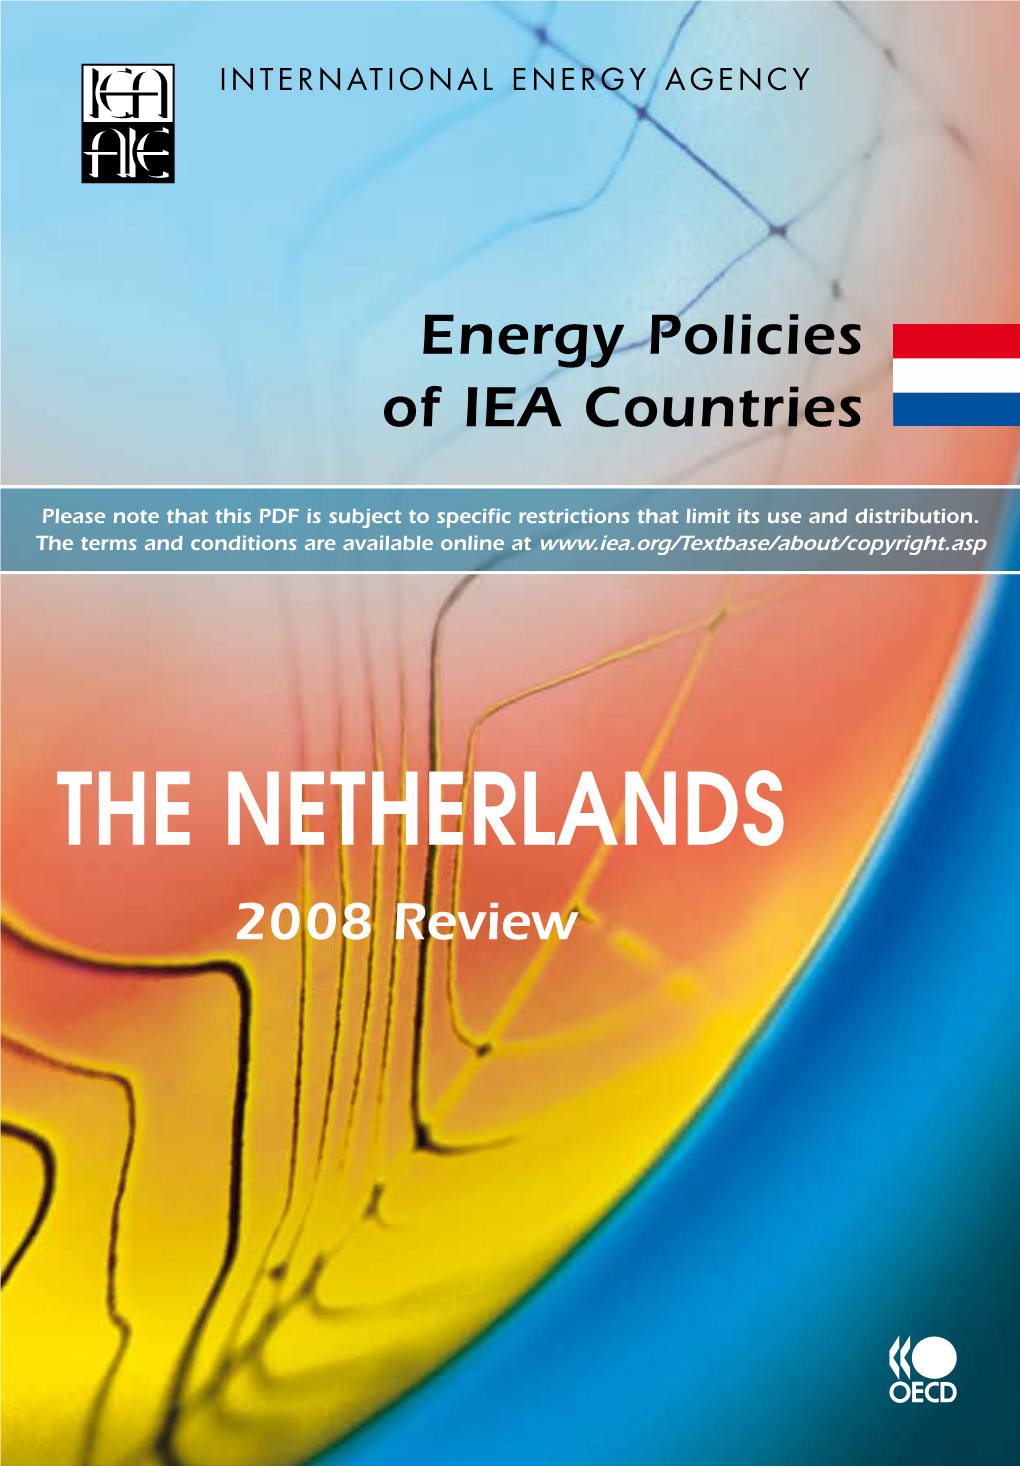 THE NETHERLANDS 2008 Review Energy Policies of IEA Countries